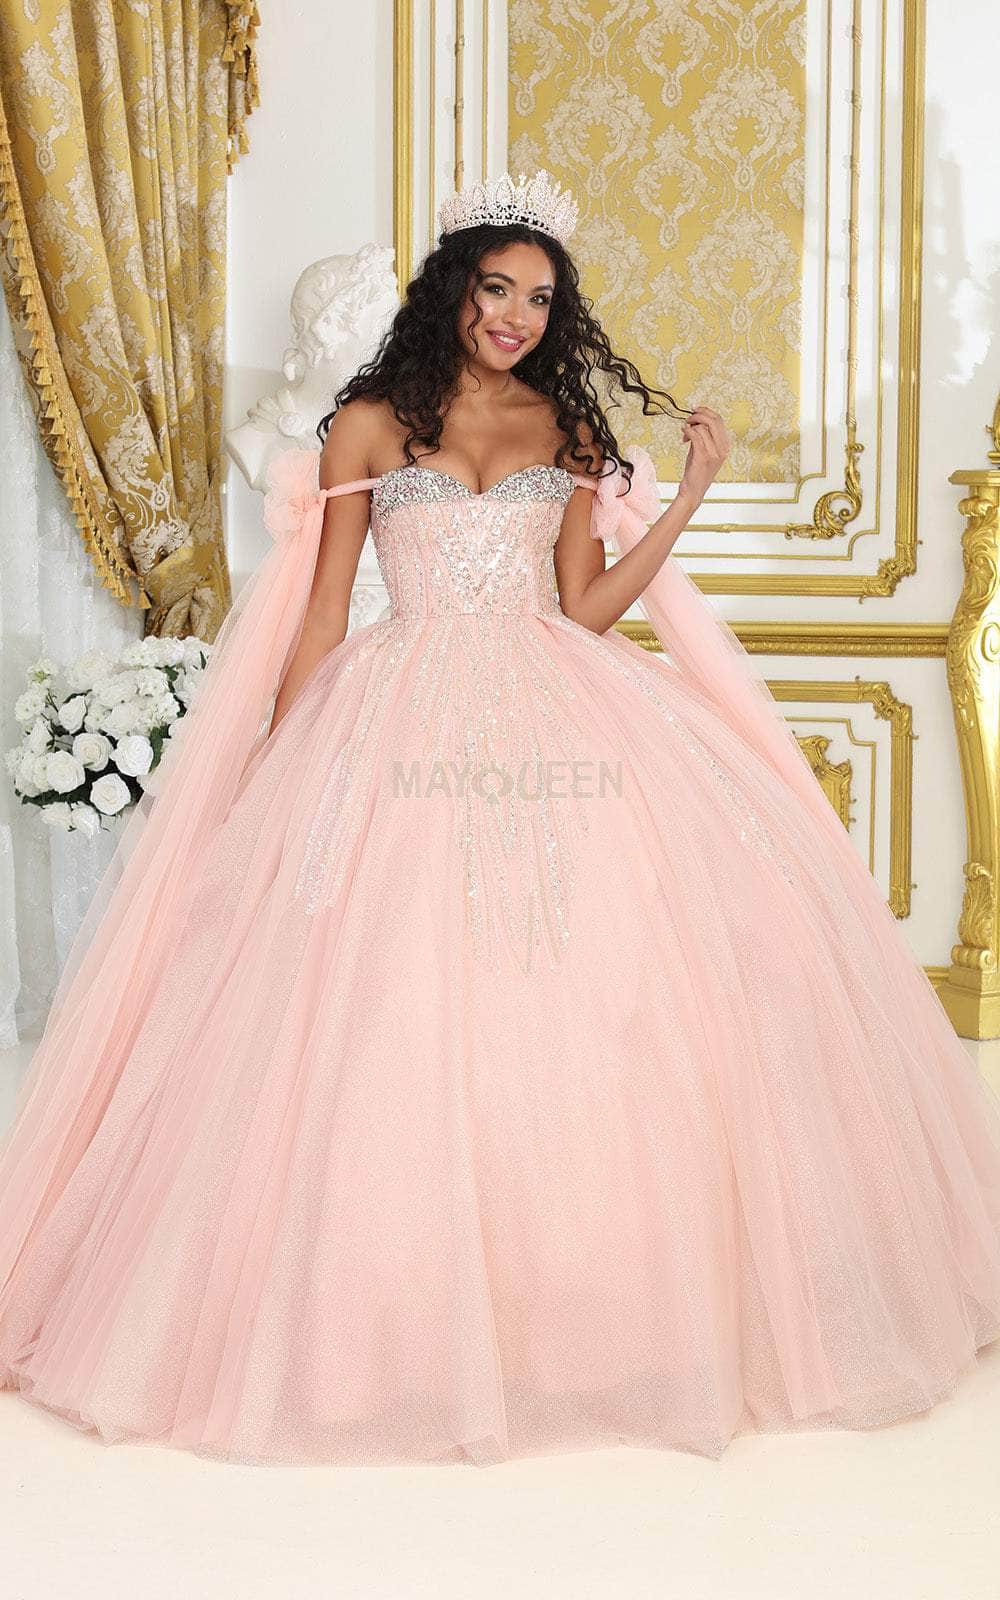 Image of May Queen LK238 - Bow Draped Ballgown